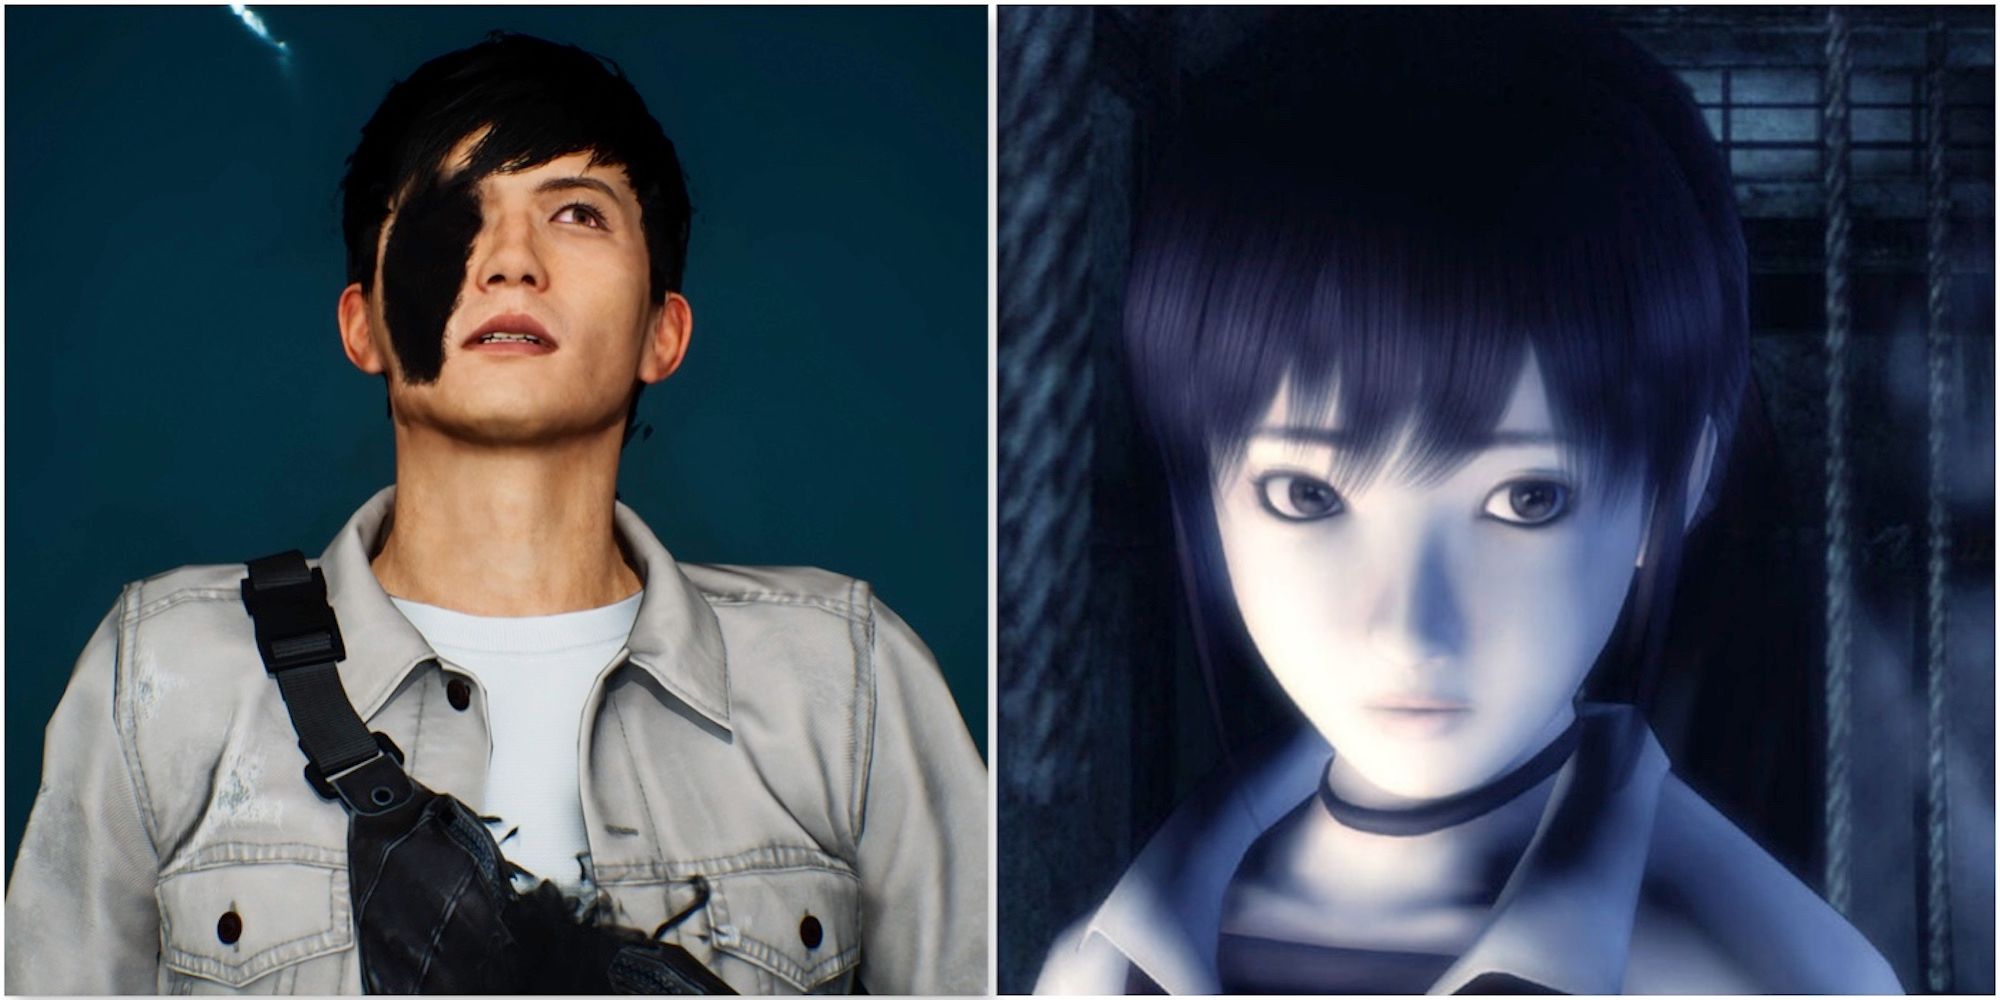 Akito from Ghostwire Tokyo and Miku Hinasaki from Fatal Frame